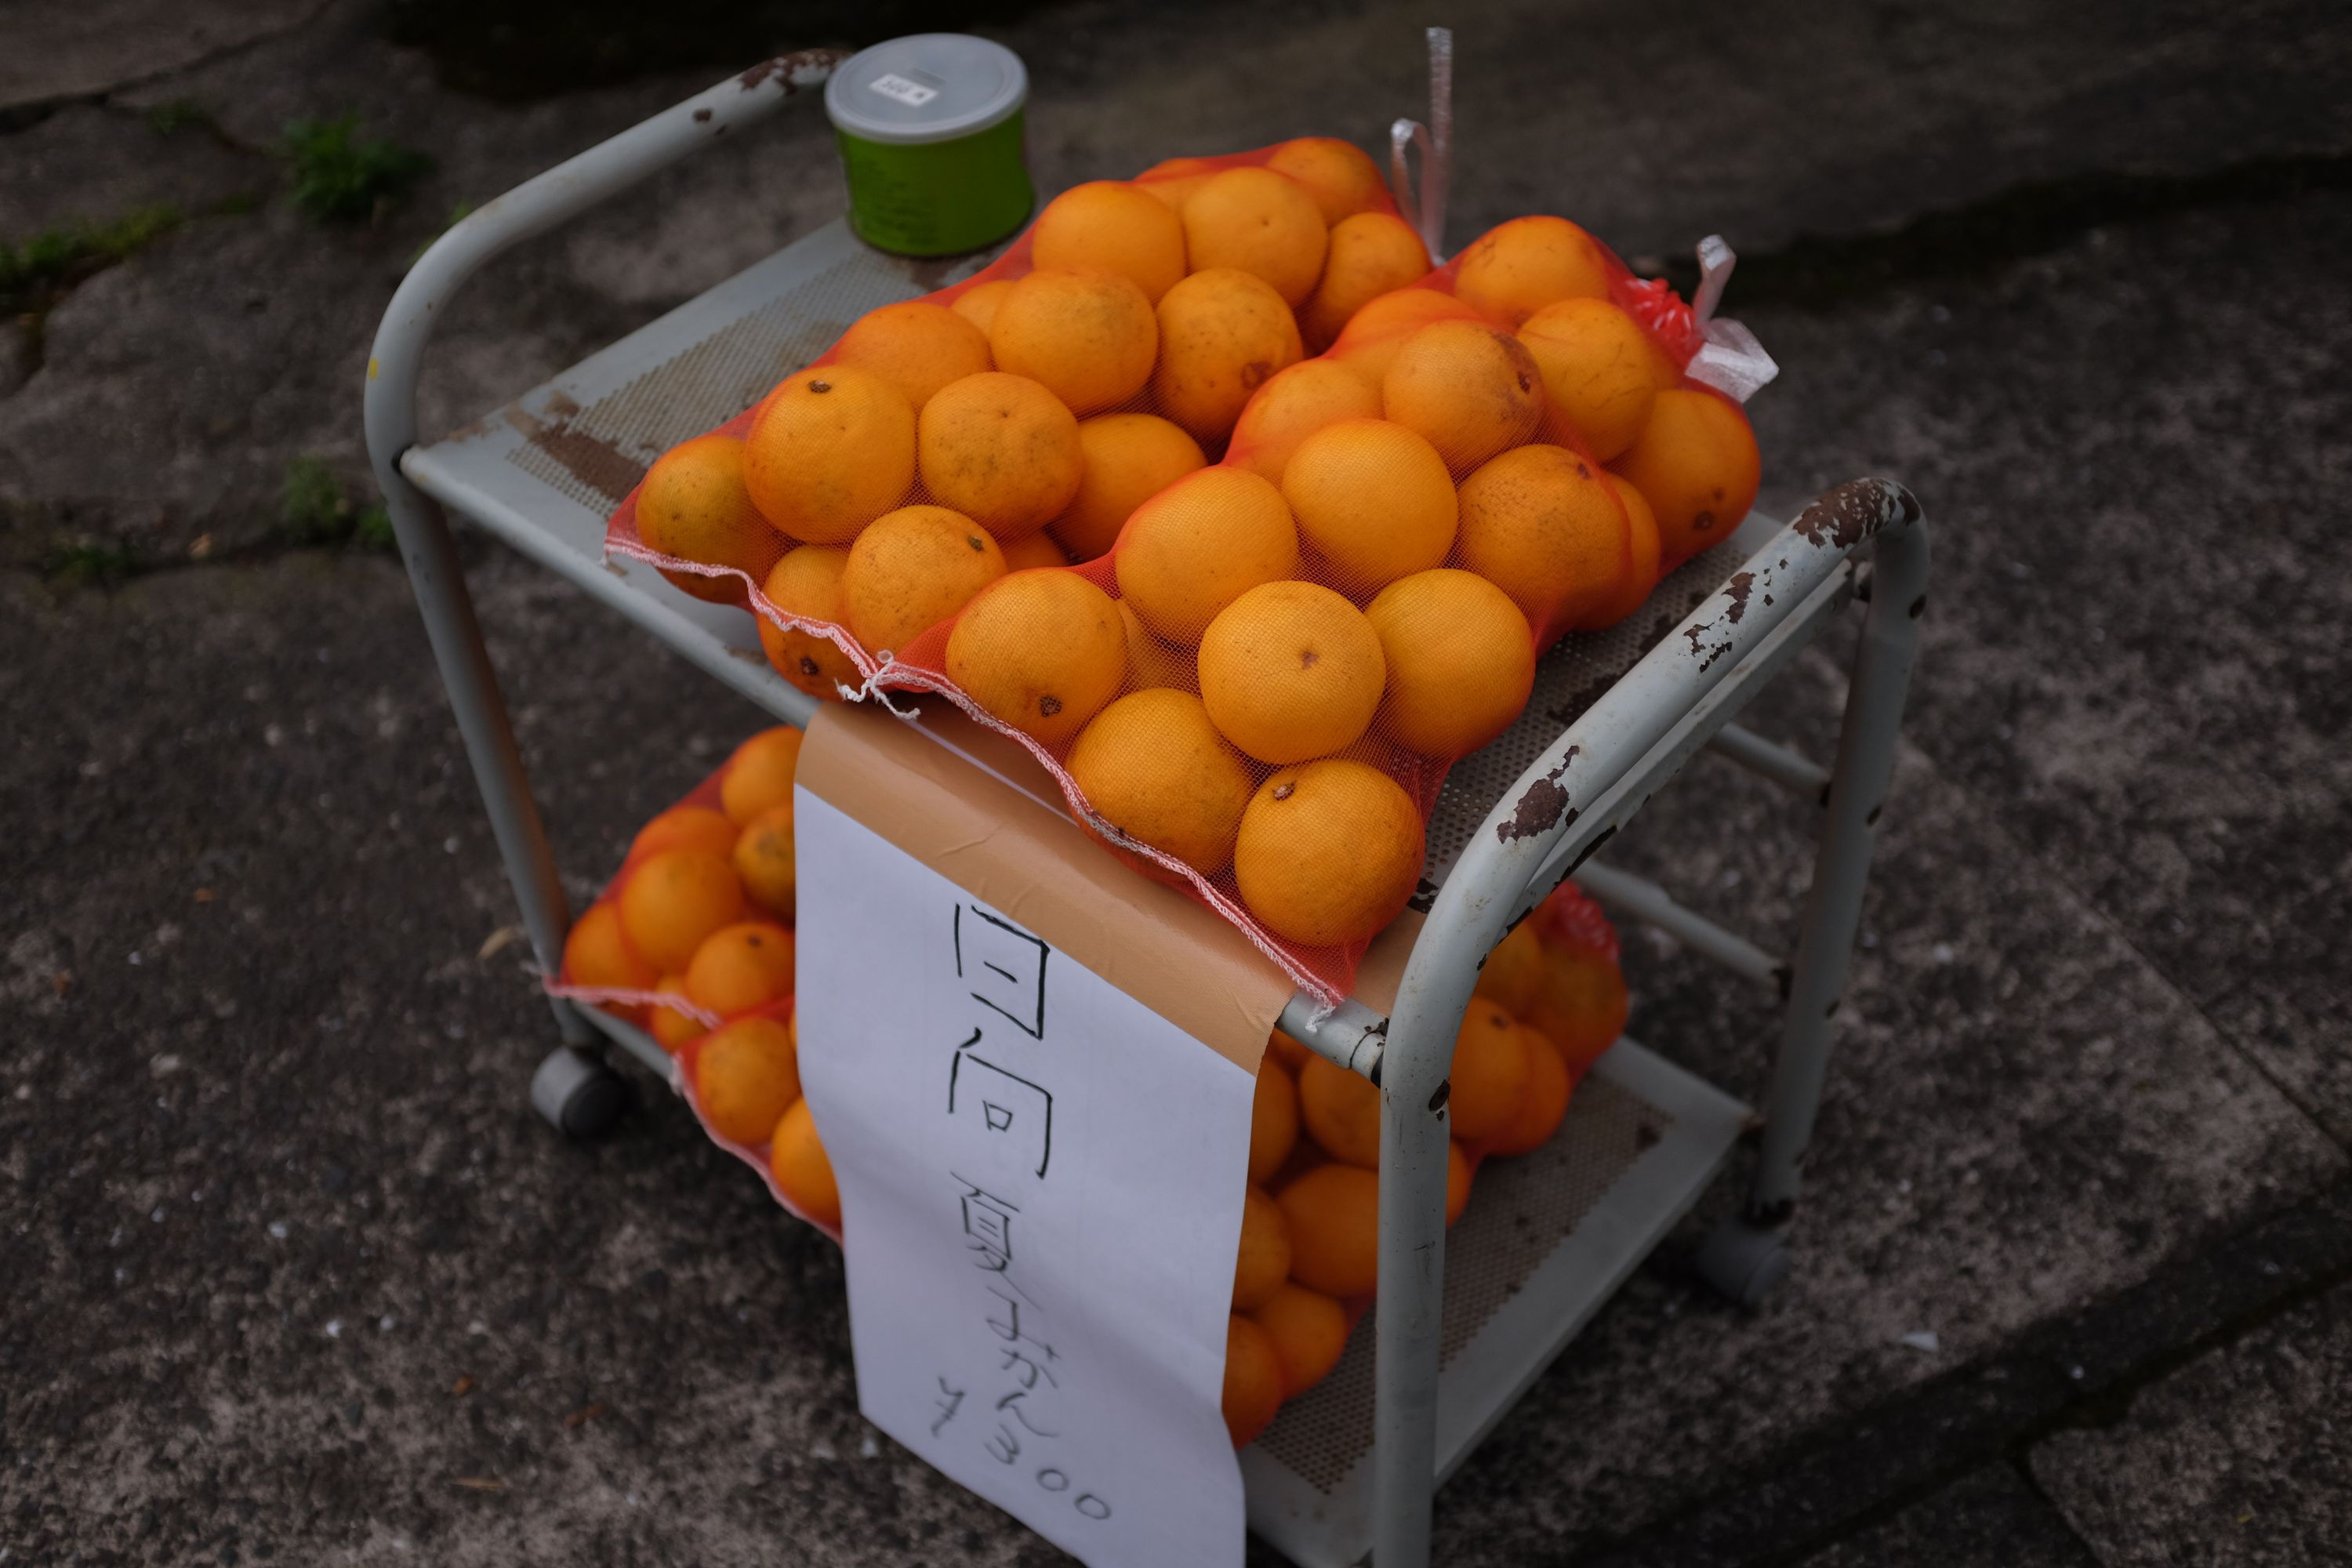 Large bags of oranges for sale on a shelf.